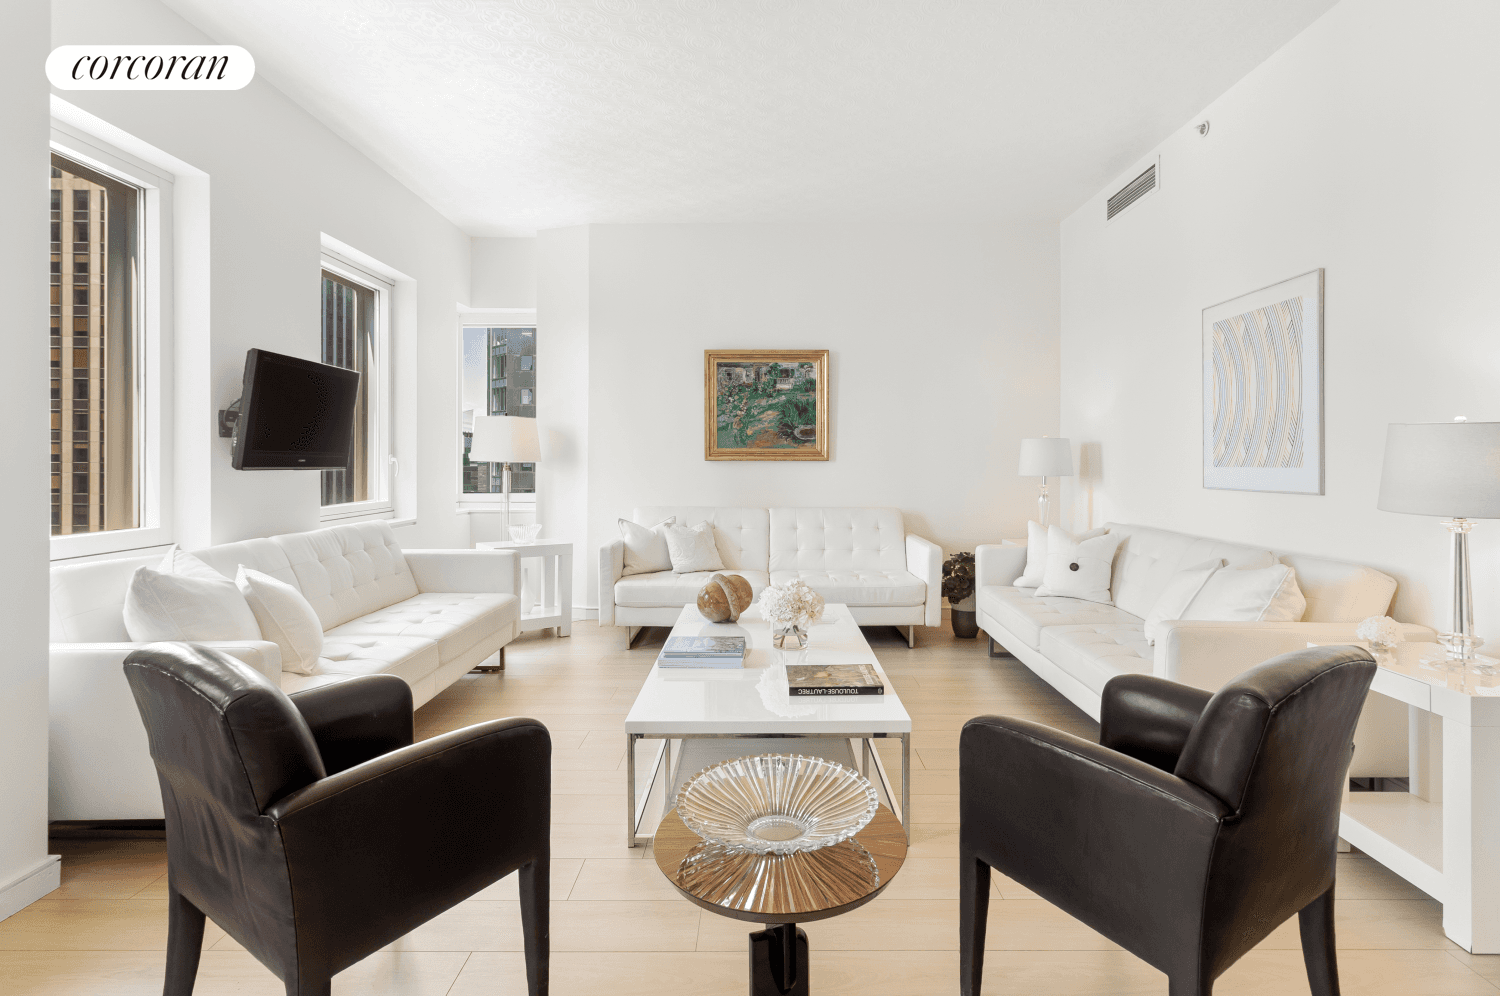 FULL FLOOR NEWLY RENOVATED DESIGNER PENTHOUSE, SPECTACULAR VIEWS FROM EVERY ROOM MIDTOWNThe phenomenal views are the perfect ever changing backdrop to the artistic vision found in every perfectly curated detail ...